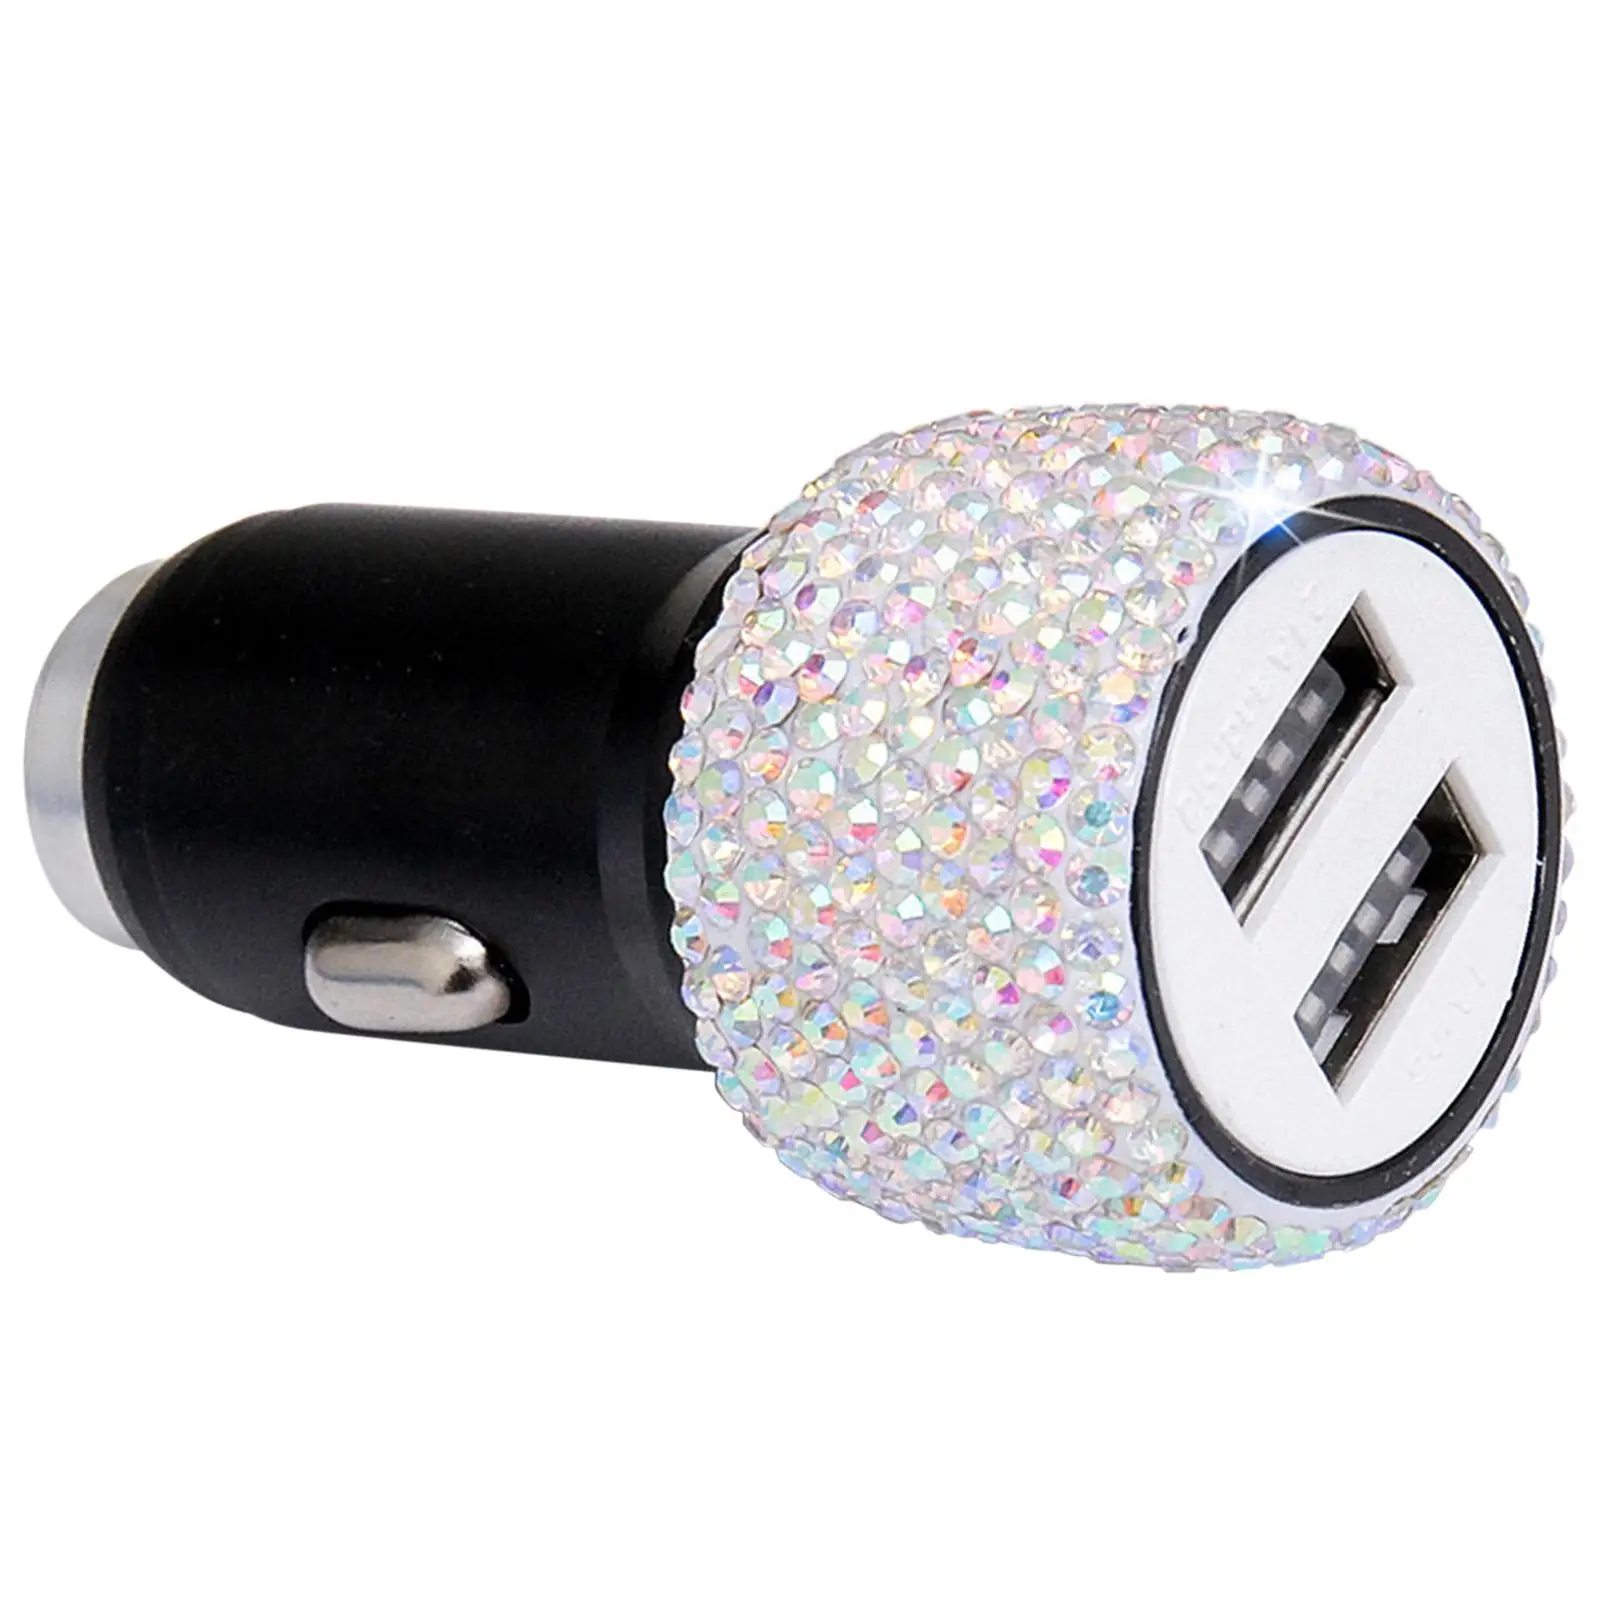 12-24V Dual USB Car Charger Adapter for Samsung Fast Charging Adapter Crystal Diamond-mounted Car Phone Safety Charger Holder